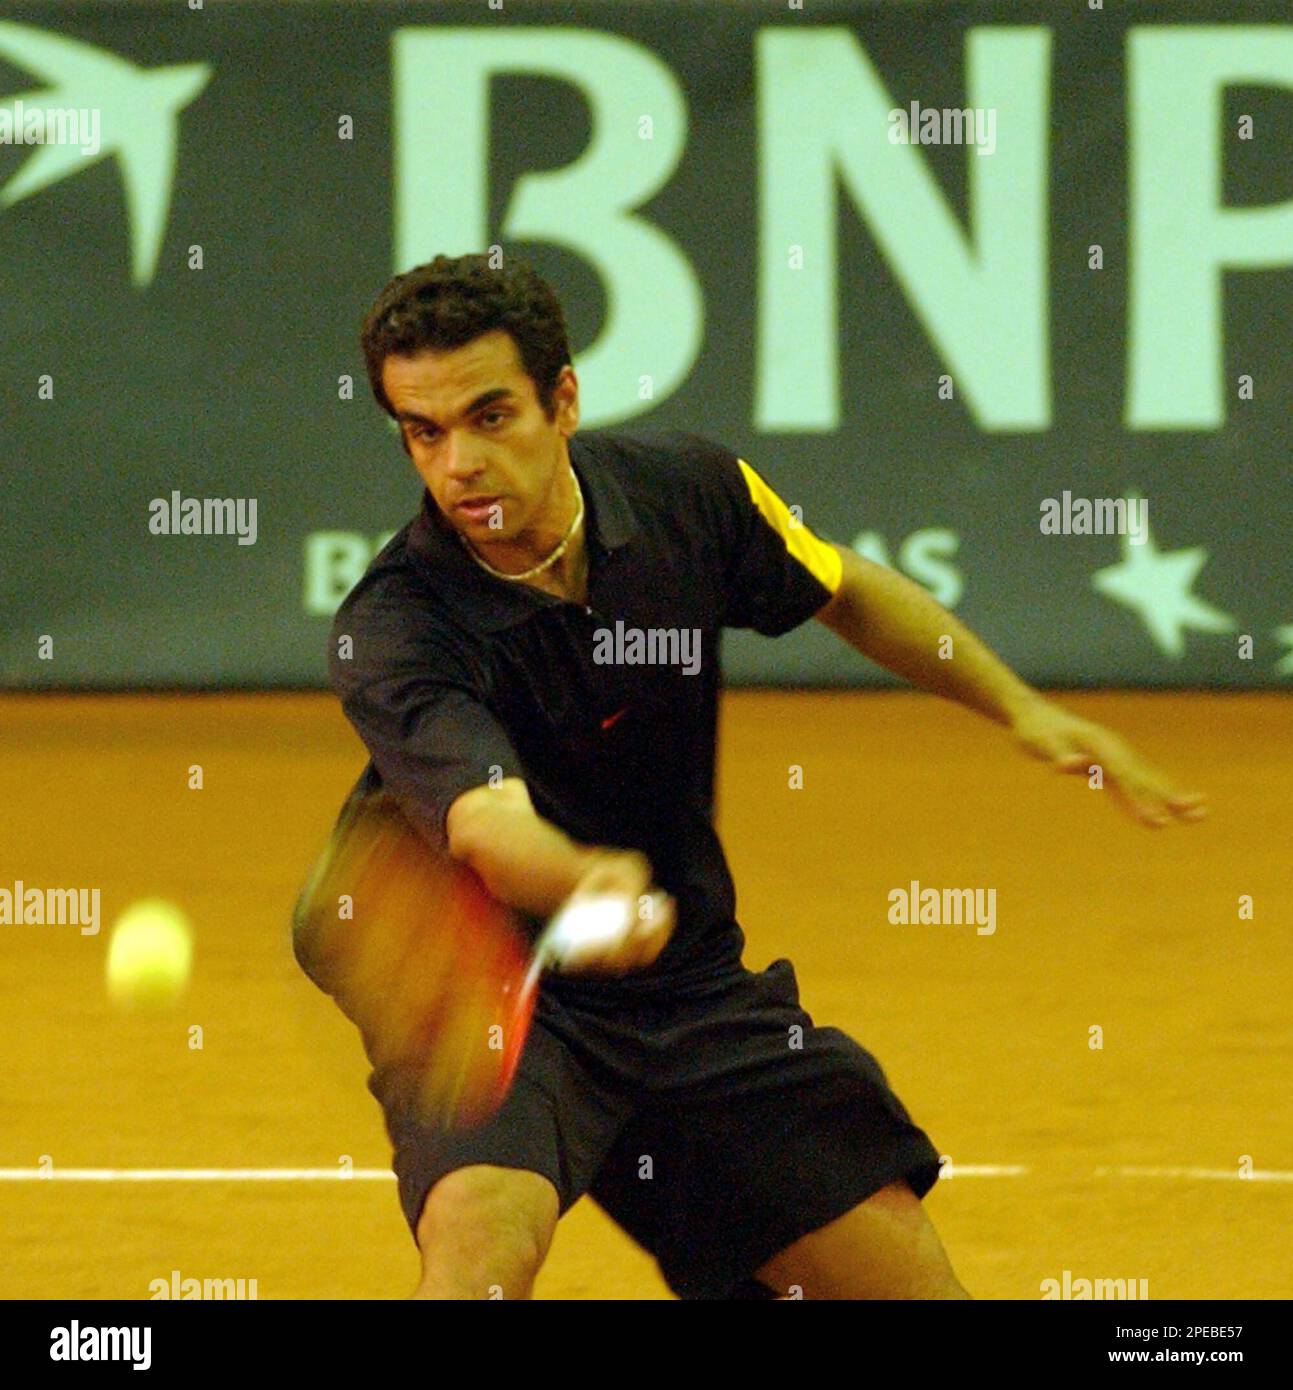 Shahab Hassani, from Iran, returns the ball to Ahmed Rabiee, from Kuwait, during their Davis Cup men's singles match at the Shiroudi sport complex in Tehran, Iran, Sunday, March 6, 2005. (AP Photo/Vahid Salemi) Stock Photo